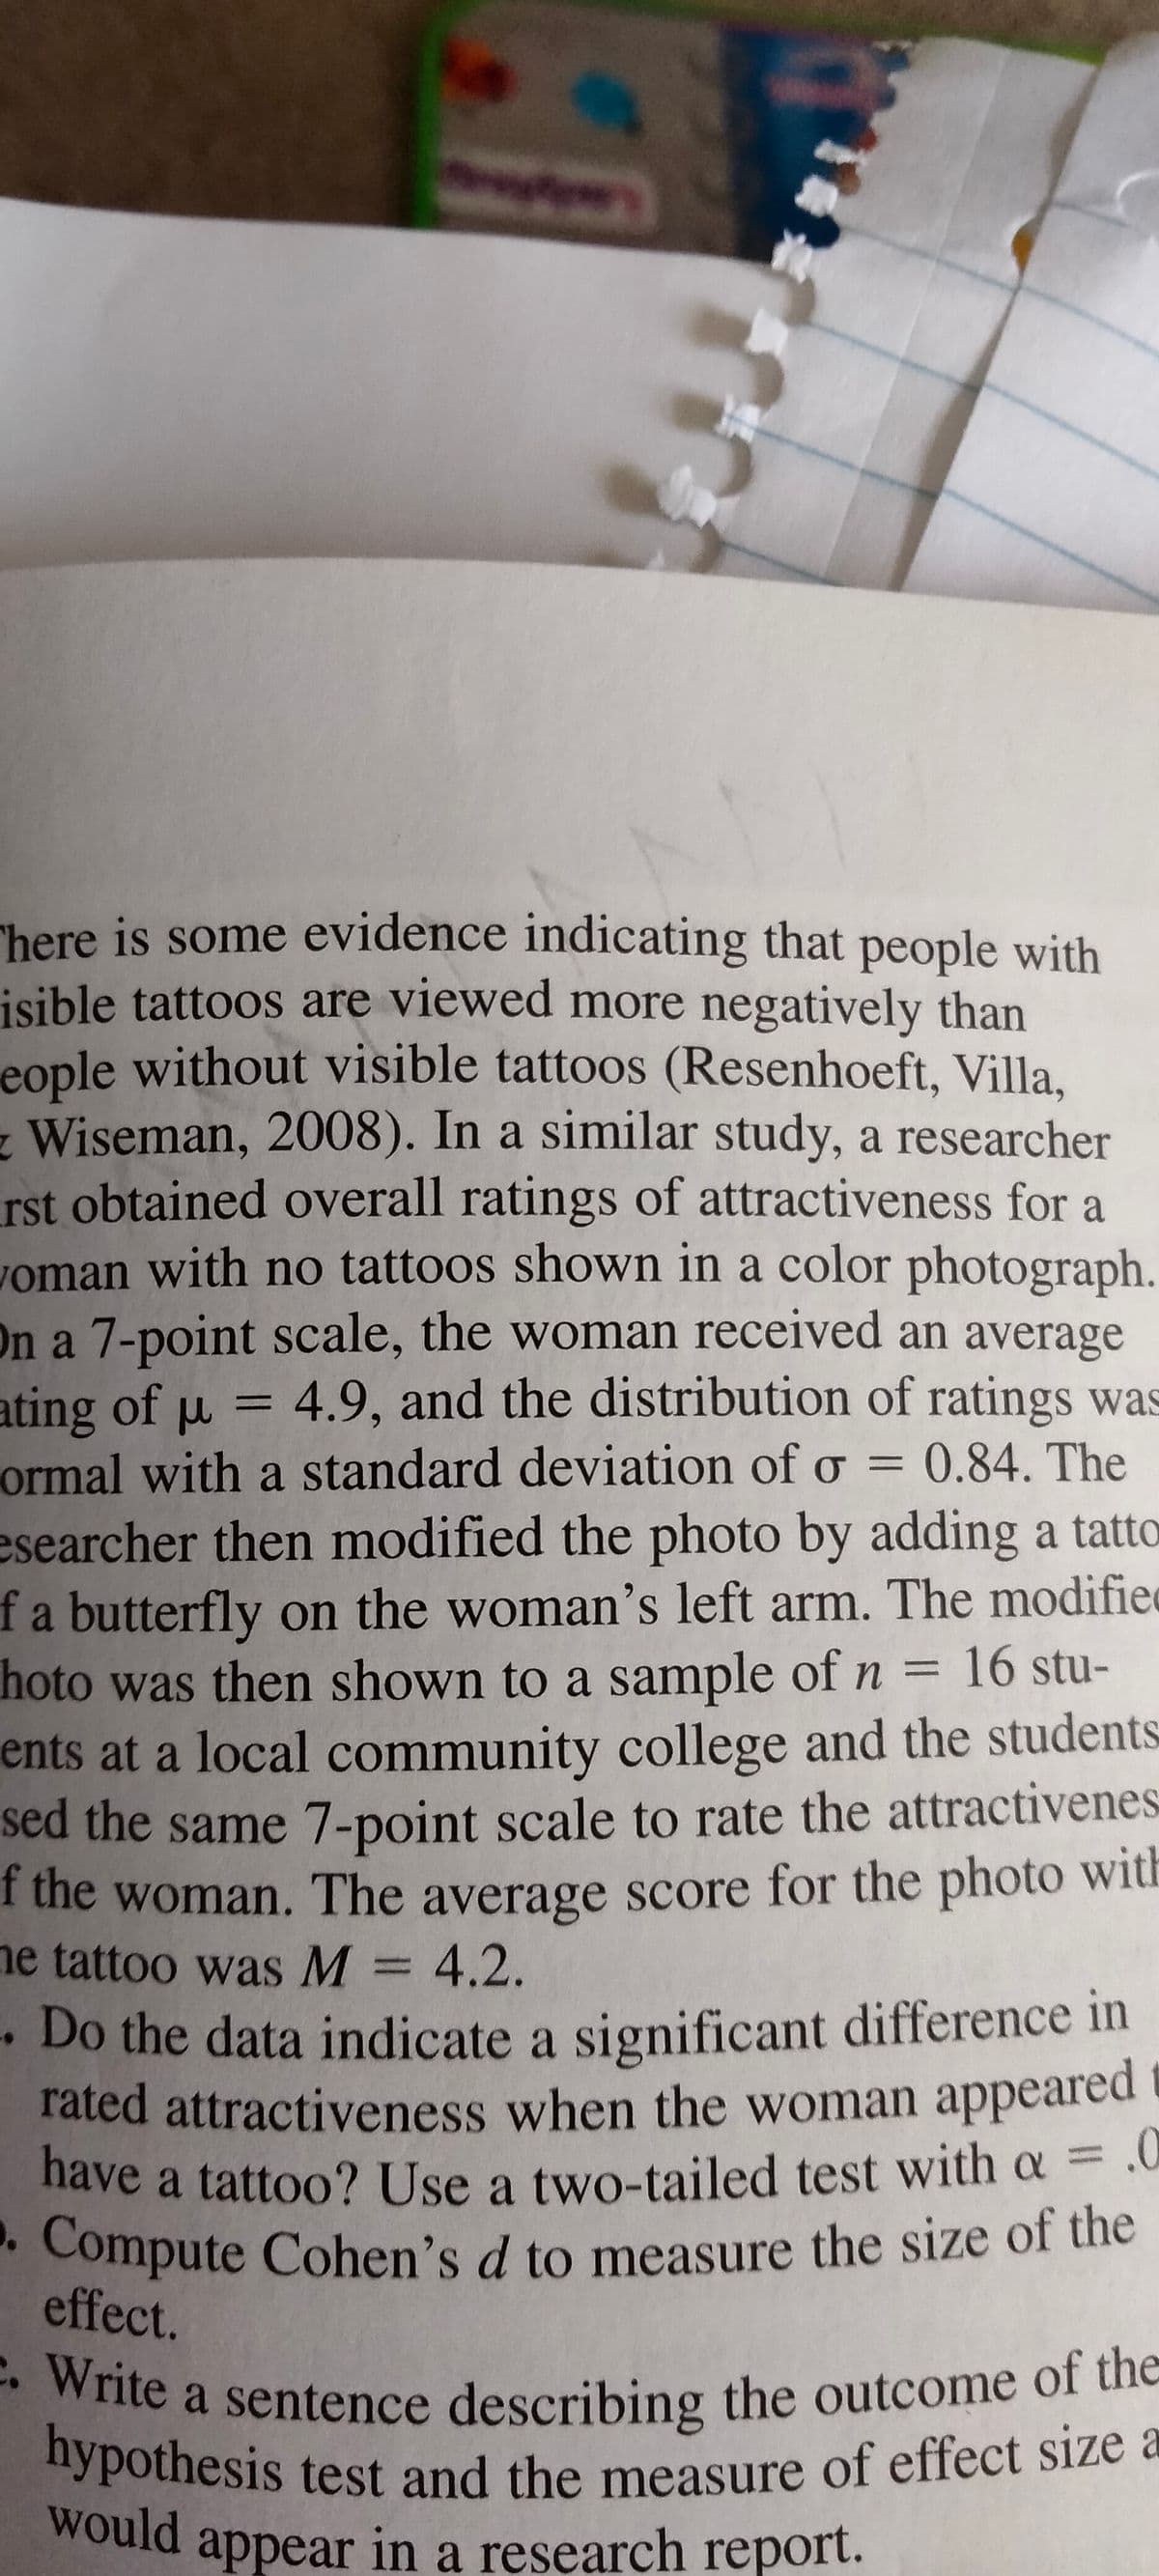 have a tattoo? Use a two-tailed test with a = .0
. Compute Cohen's d to measure the size of the
hypothesis test and the measure of effect size a
e. Write a sentence describing the outcome of the
"here is some evidence indicating that people with
isible tattoos are viewed more negatively than
eople without visible tattoos (Resenhoeft, Villa,
z Wiseman, 2008). In a similar study, a researcher
rst obtained overall ratings of attractiveness for a
woman with no tattoos shown in a color photograph
On a 7-point scale, the woman received an average
ating of u = 4.9, and the distribution of ratings was
ormal with a standard deviation of o = 0.84. The
esearcher then modified the photo by adding a tatto
fa butterfly on the woman's left arm. The modifiec
hoto was then shown to a sample of n =
ents at a local community college and the students
sed the same 7-point scale to rate the attractivenes
f the woman. The average score for the photo with
ne tattoo was M = 4.2.
%3D
%3D
16stu-
-Do the data indicate a significant difference in
rated attractiveness when the woman appeared
a
• Compute Cohen's d to measure the size of the
effect.
. Write
"ypothesis test and the measure of effect size a
would
appear in a research report.
